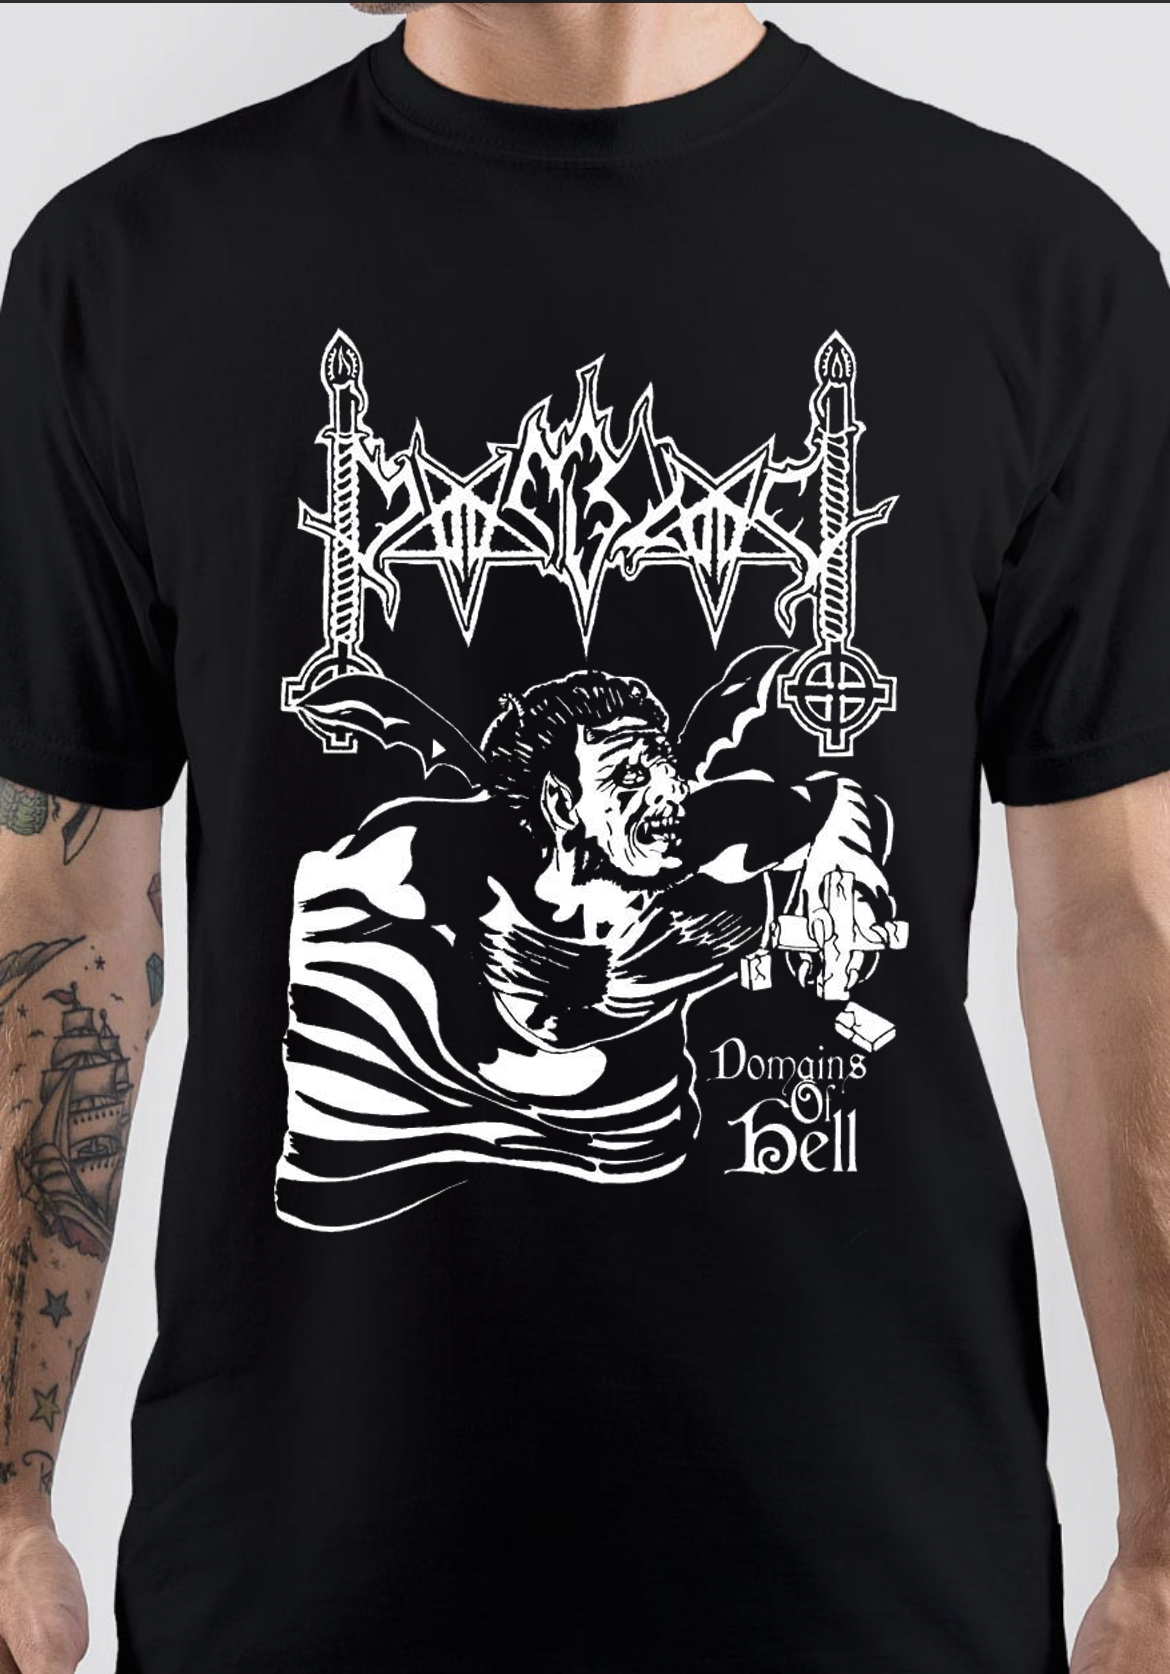 Moonblood T-Shirt And Merchandise